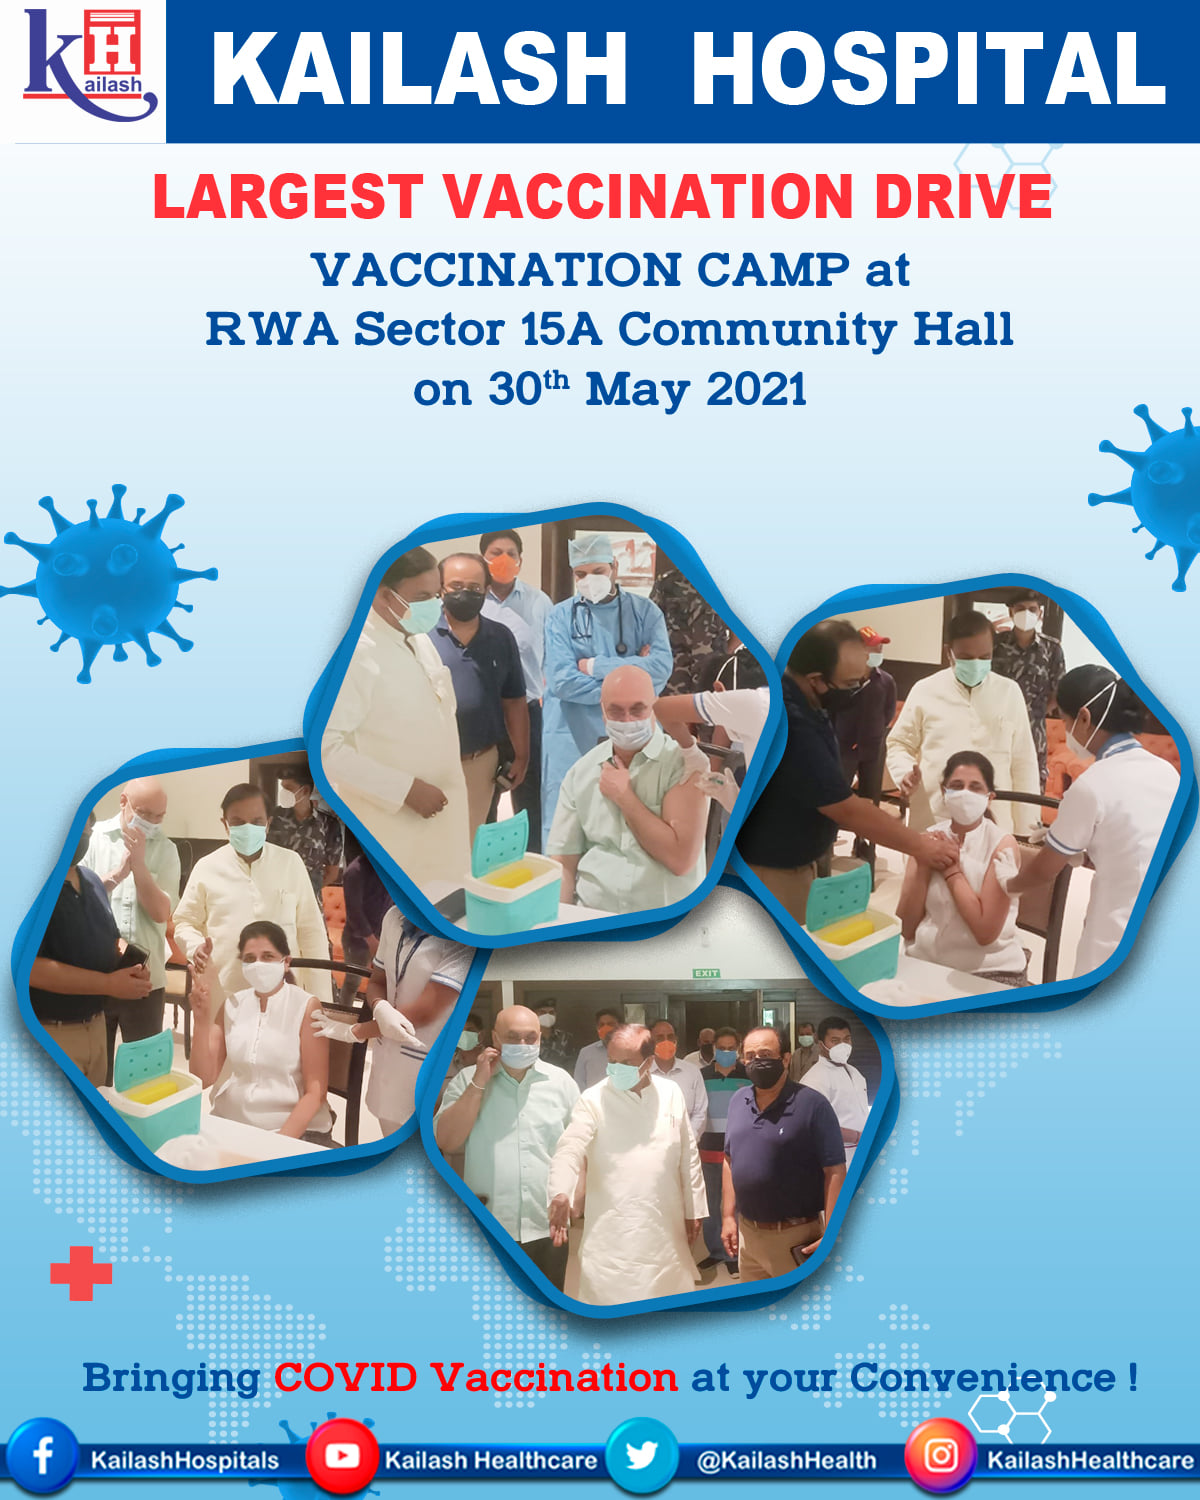 As part of the Largest Vaccination Drive started by Kailash Hospital from 29th May 2021, here is a glimpse of the Vaccination Camp organized at RWA Sector 15A on 30th May